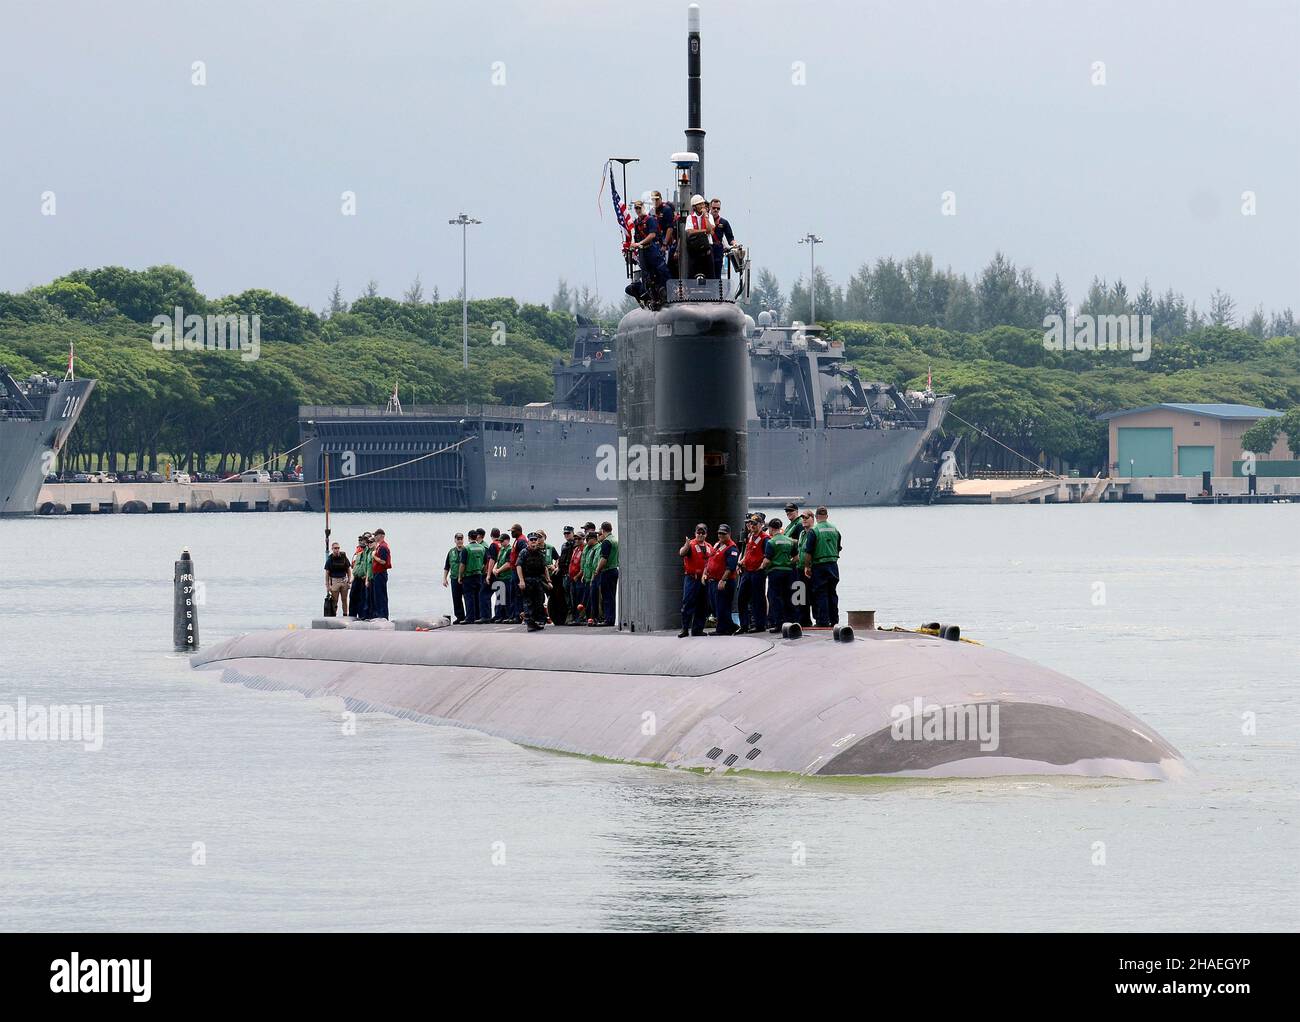 Credit: MC1 Jay Pugh/U.S. Navy/Alamy Live NewsChangi, Singapore. 16 July, 2013. The U.S. Navy Los Angeles-class fast-attack submarine USS Charlotte motors into Changi Naval Base for a port visit during exercise Cooperation Afloat Readiness and Training July 16, 2013 in Changi, Singapore. Stock Photo